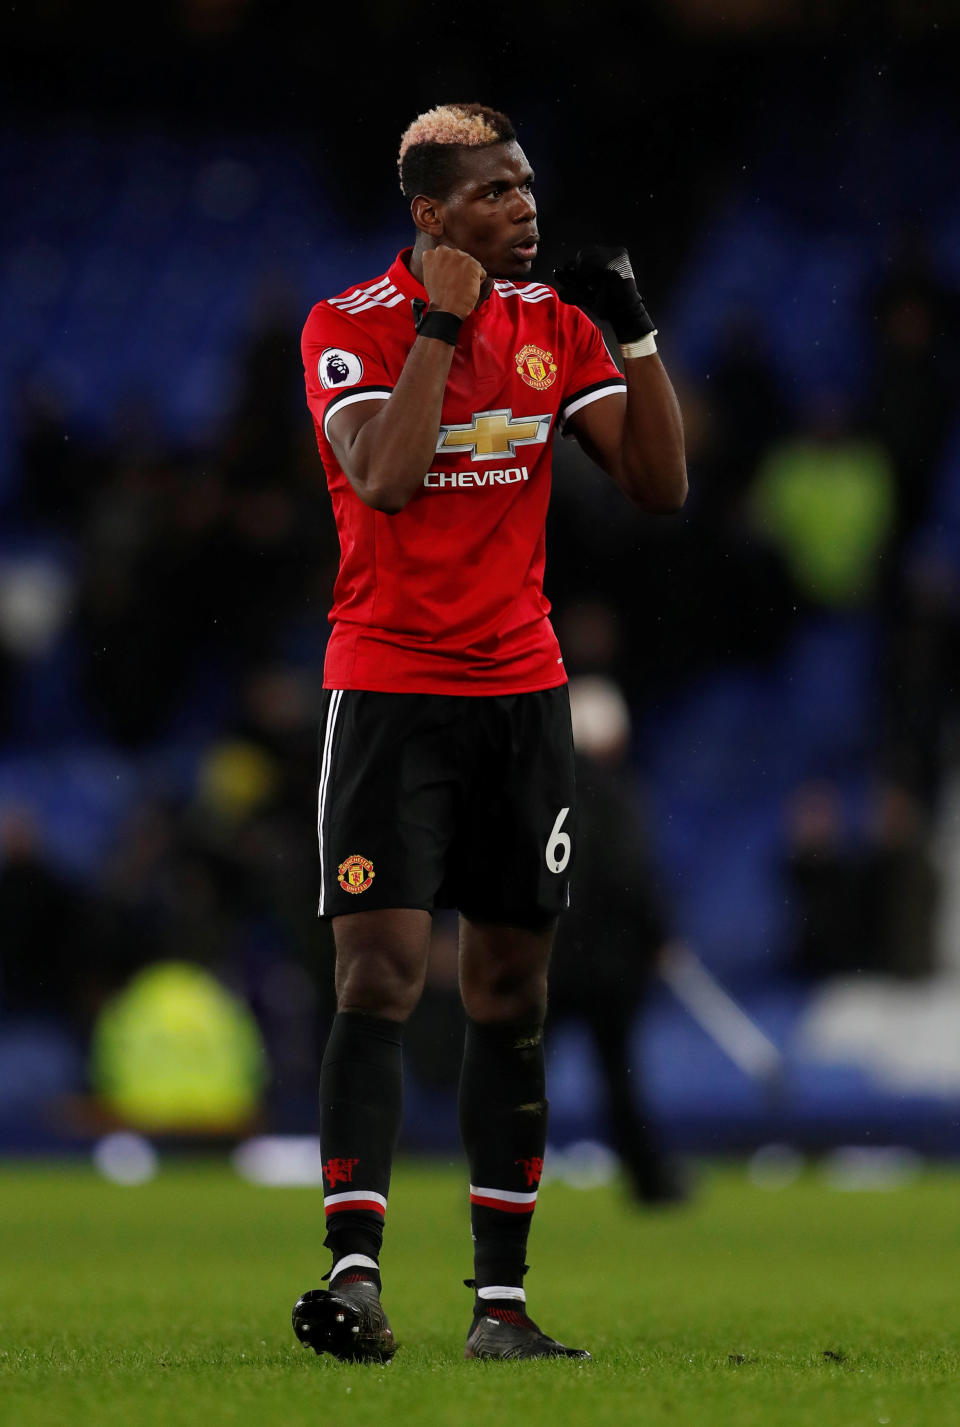 Paul Pogba picked up the Man of the Match award for his spectacular display against Everton